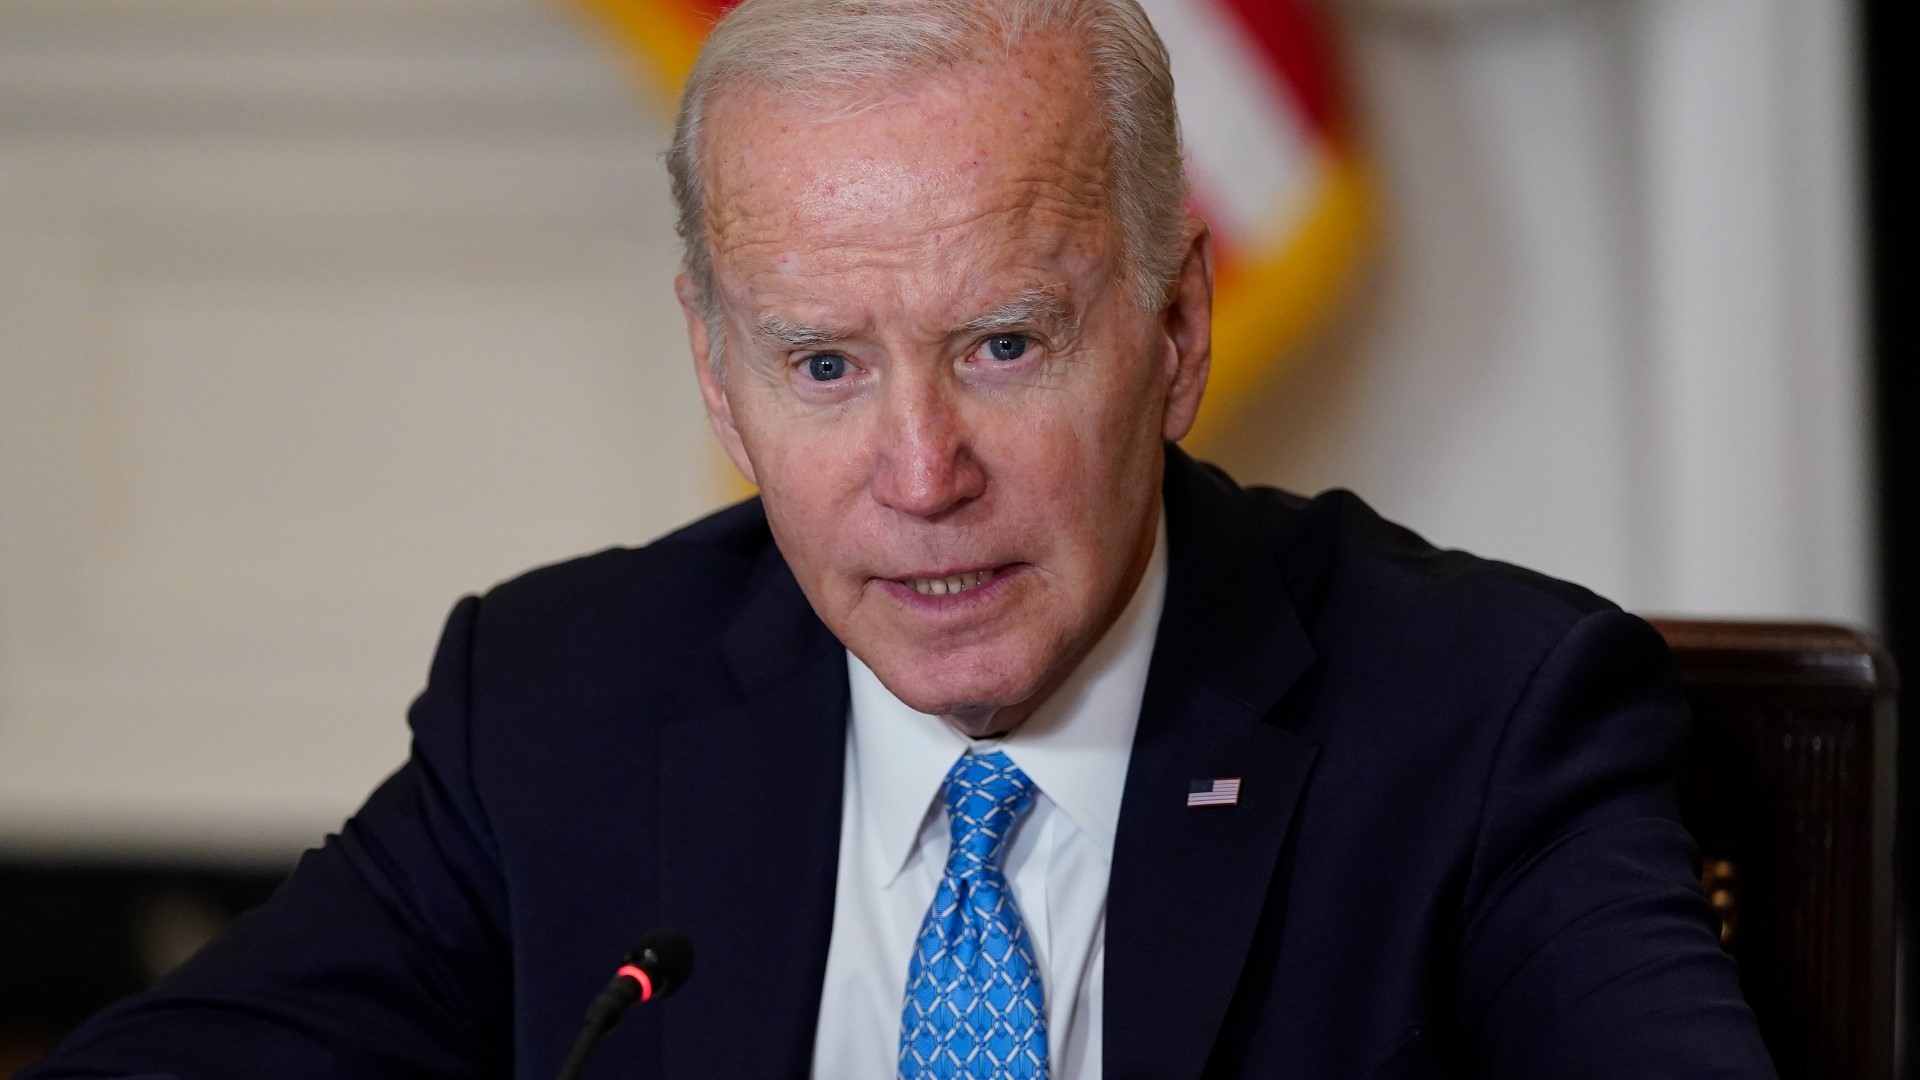 Biden’s forgiveness program will cancel $10,000 in student loan debt for those making less than $125,000 or households with less than $250,000 in income.